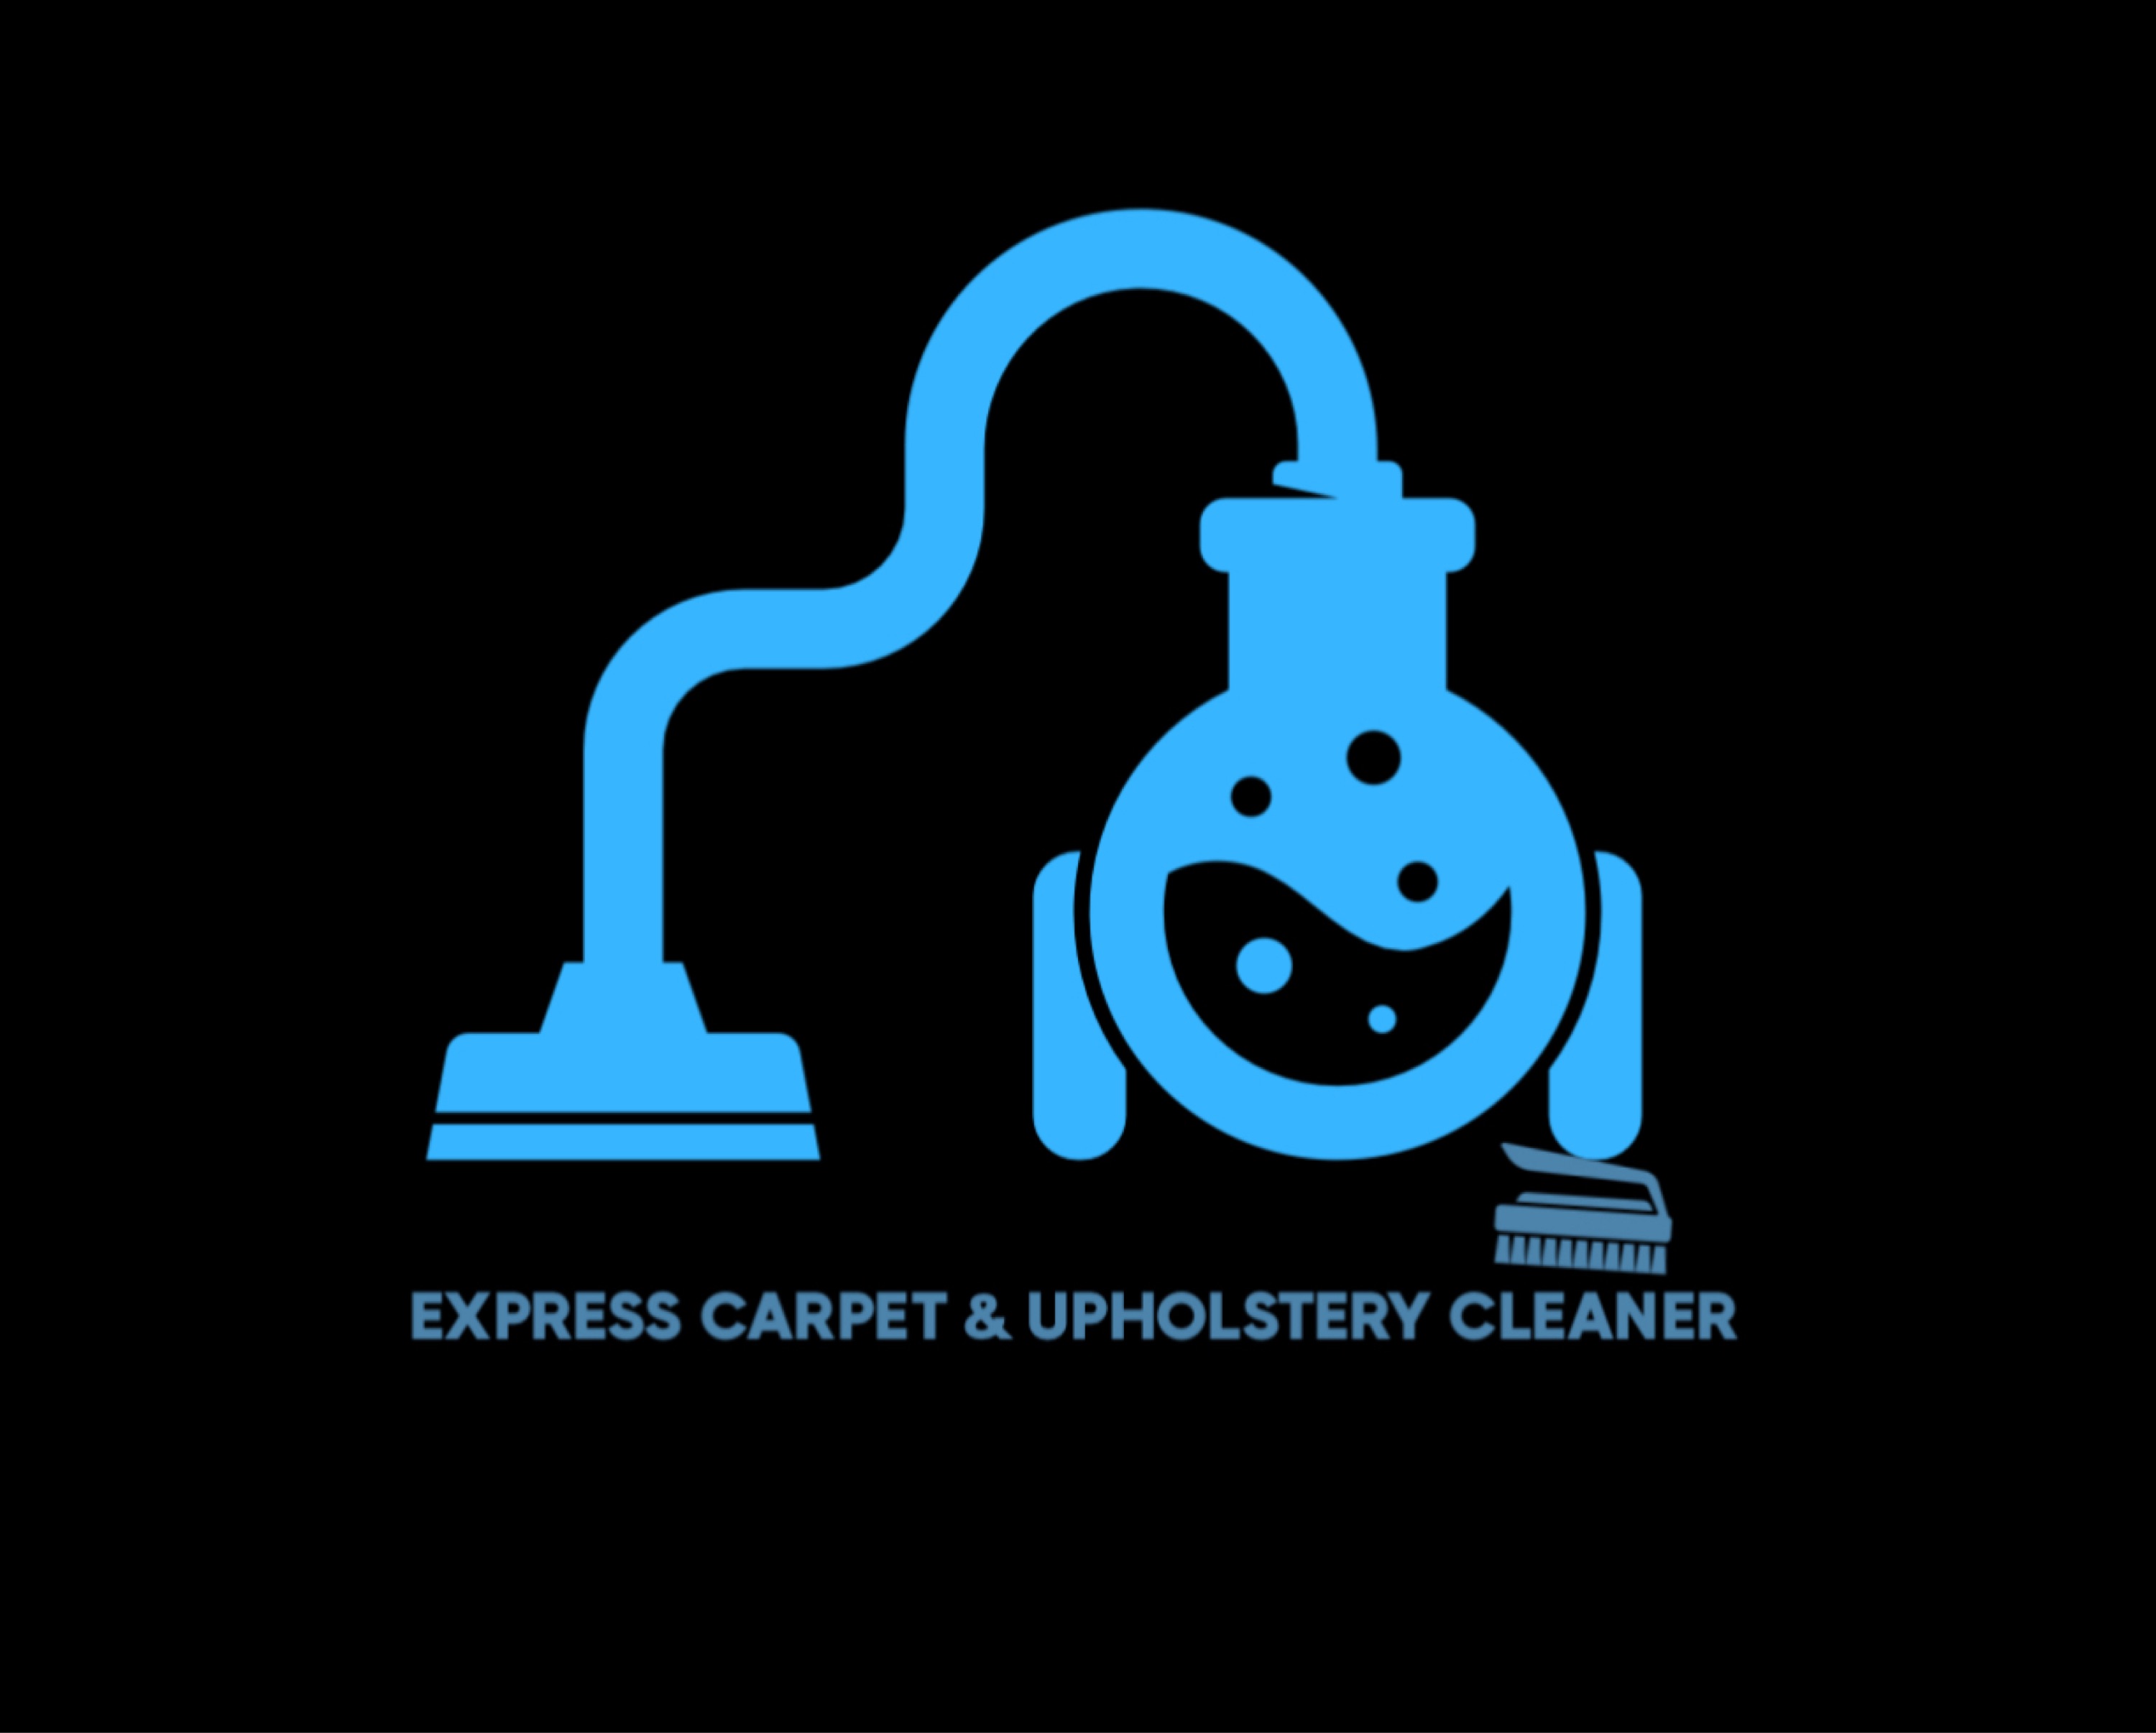 Express Carpet and Upholstery Cleaner Logo